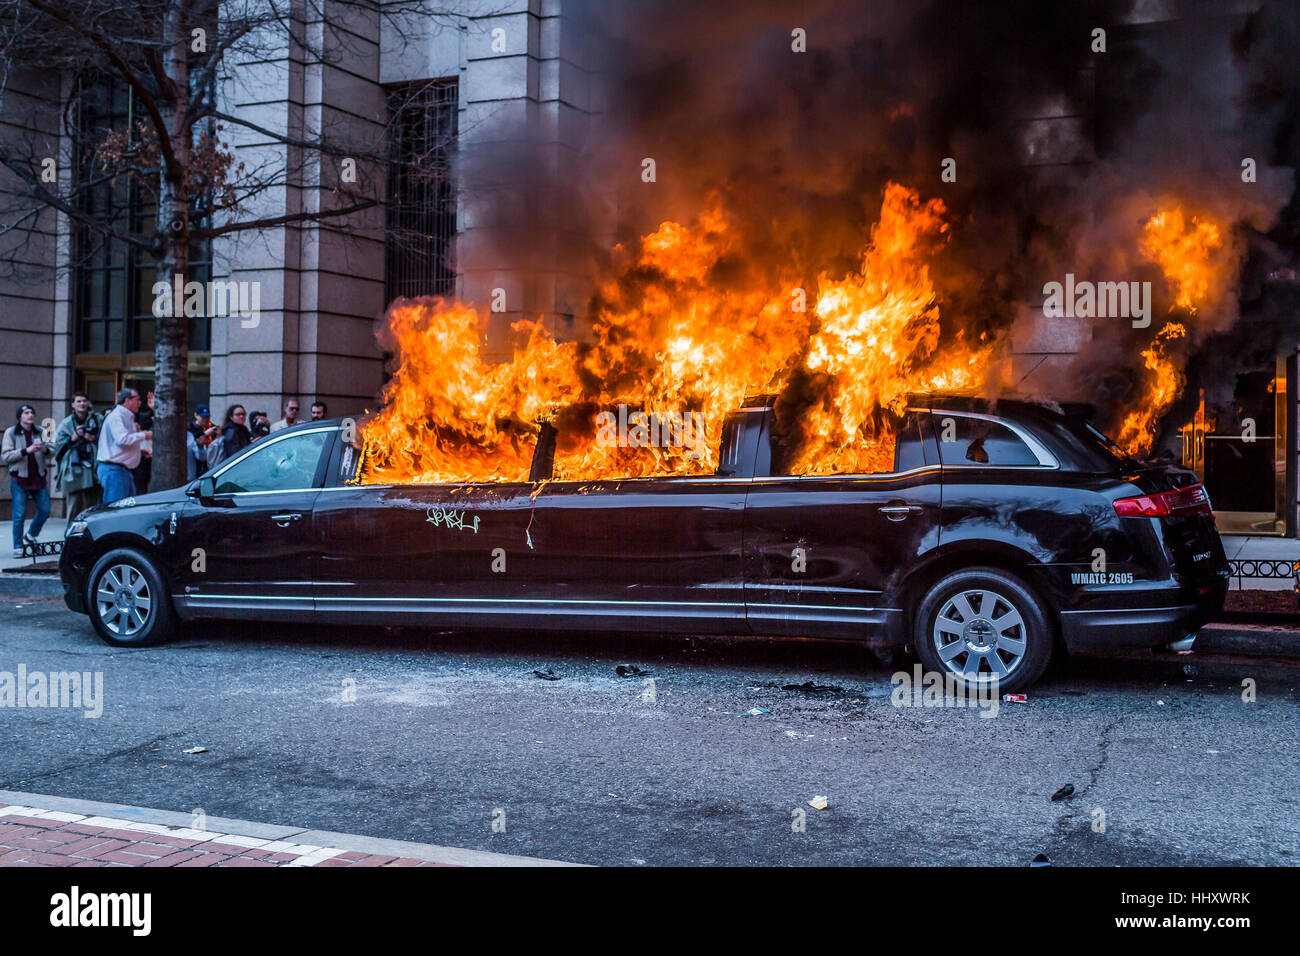 Washington, USA. 20th Jan, 2017. Hours after Donald Trump was inaugurated as the 45th President of the United States, On January, 20, 2017, protesters vandalized property, including setting a limousine ablaze, which escalated the into police to deploy pepper spray, tear gas, rubber bullets and flash grenades. Credit: PACIFIC PRESS/Alamy Live News Stock Photo